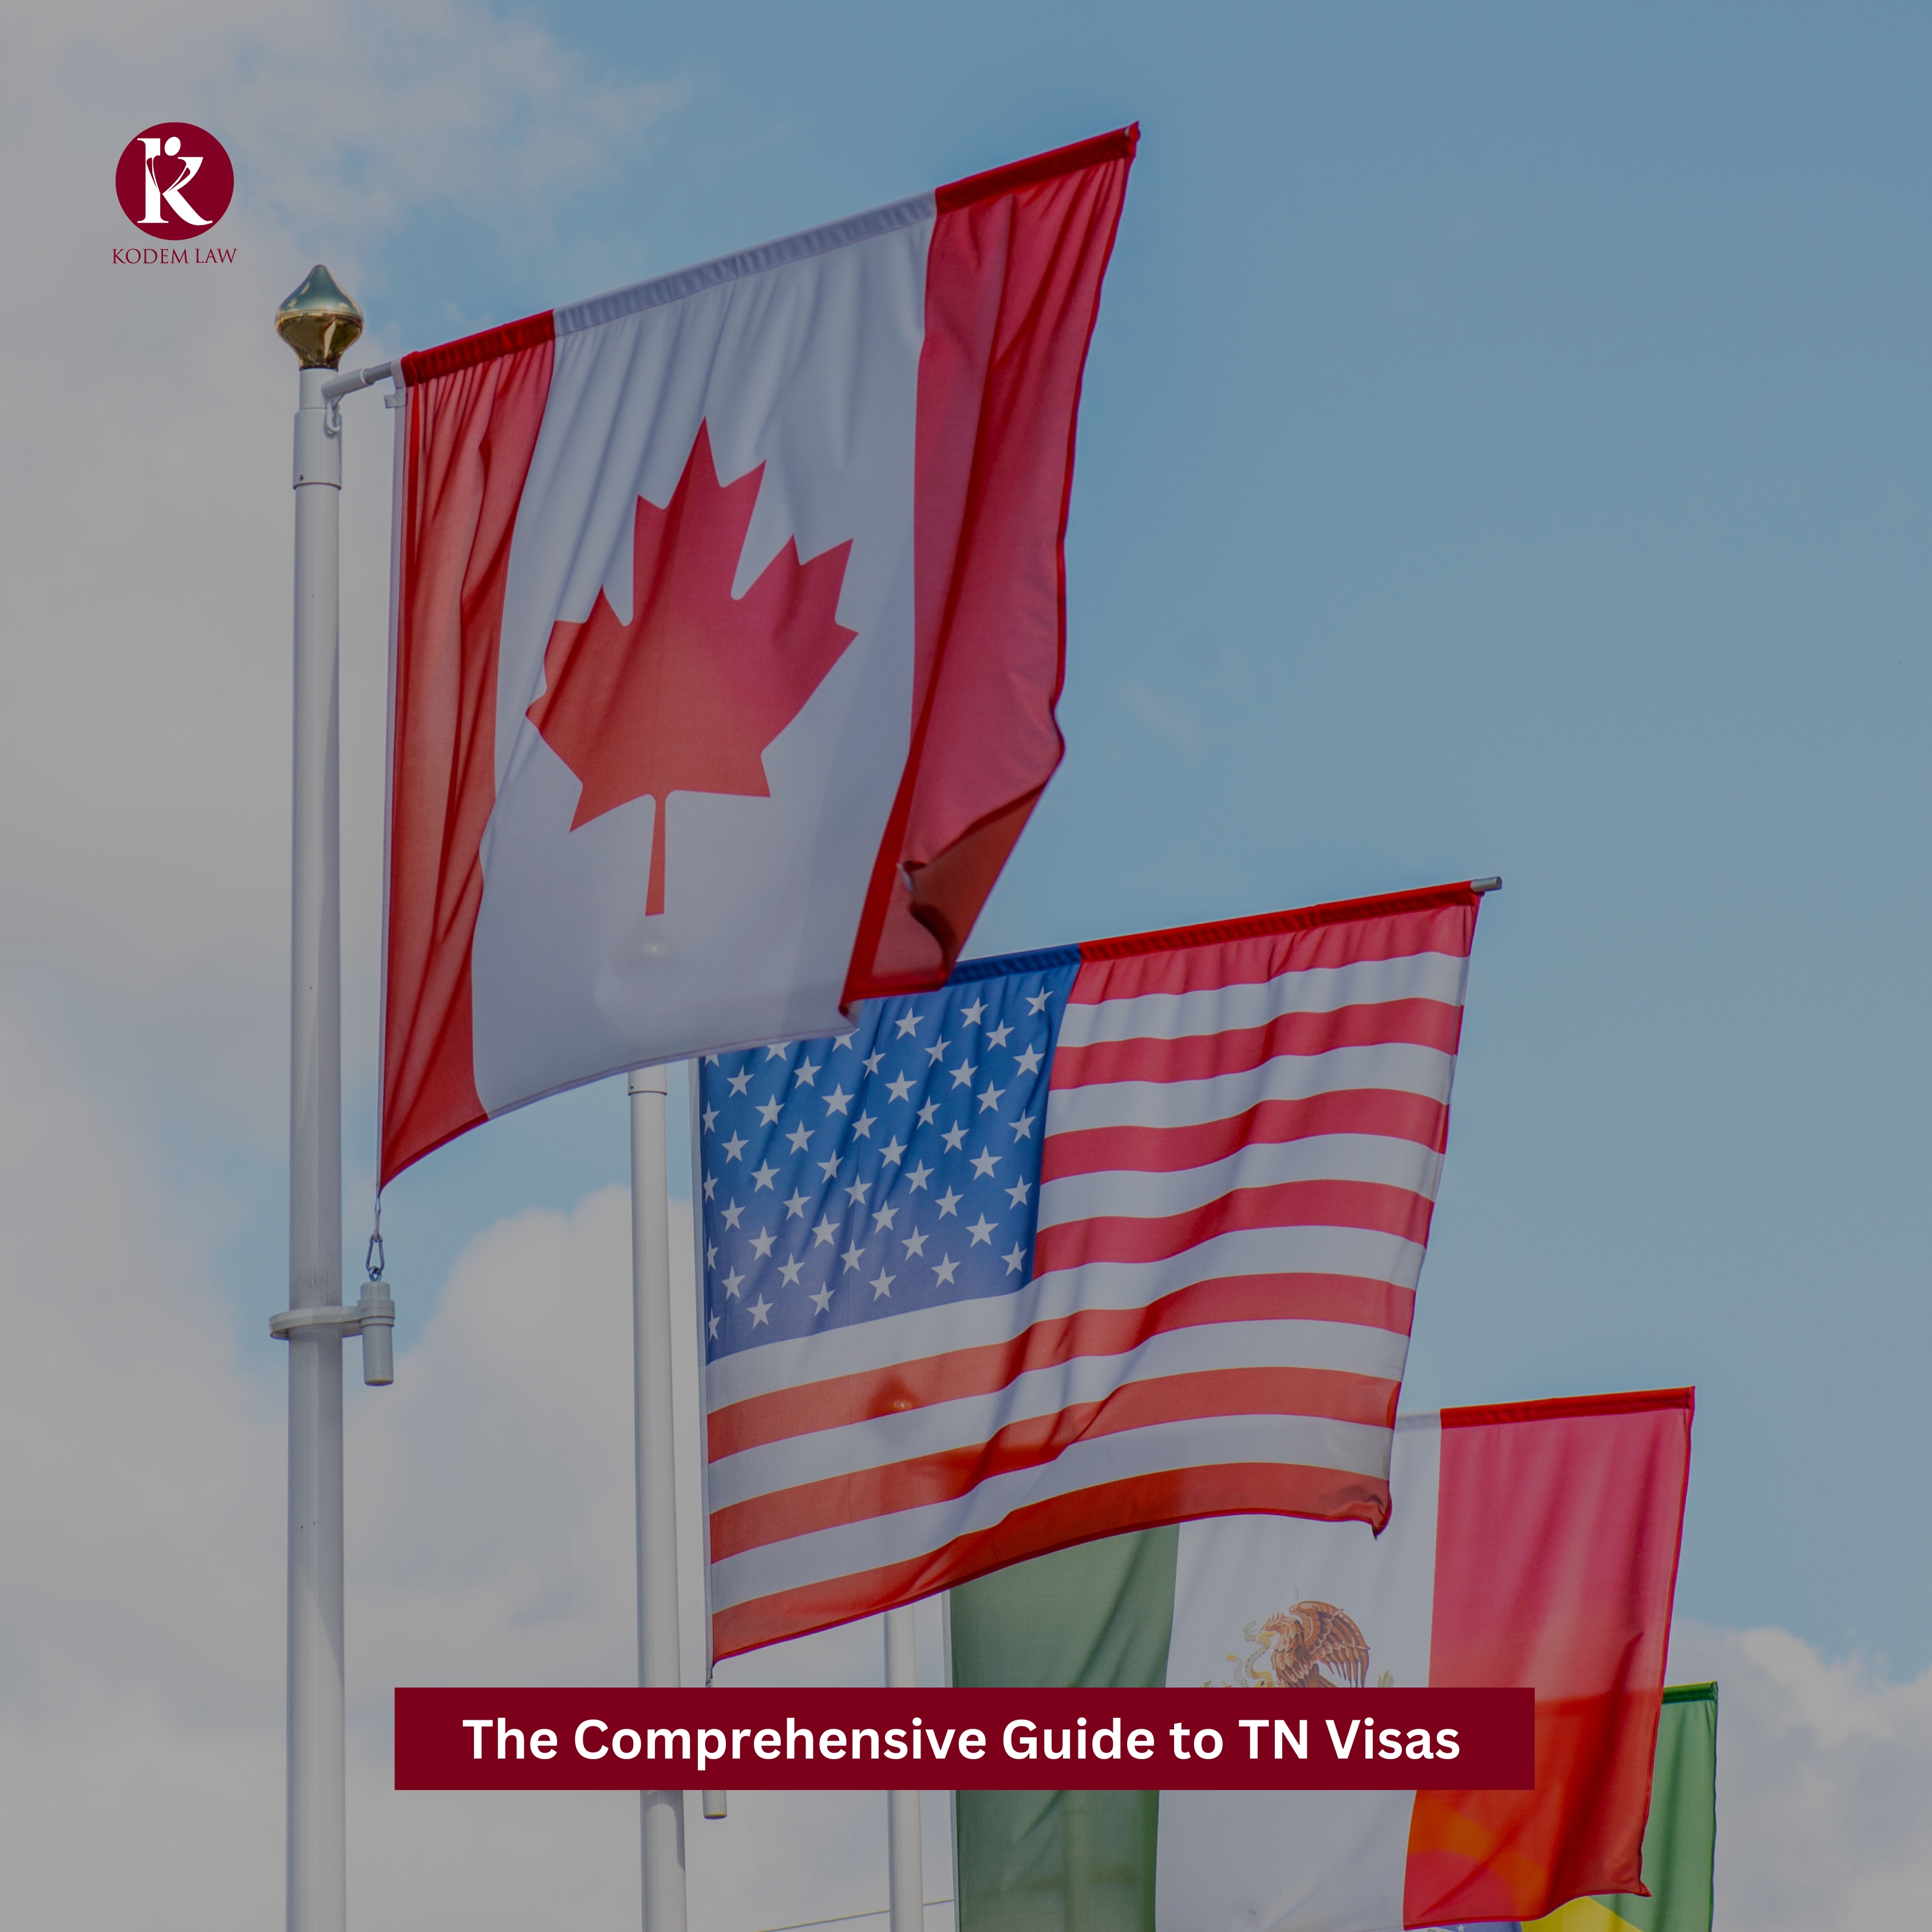 The Comprehensive Guide to TN Visas